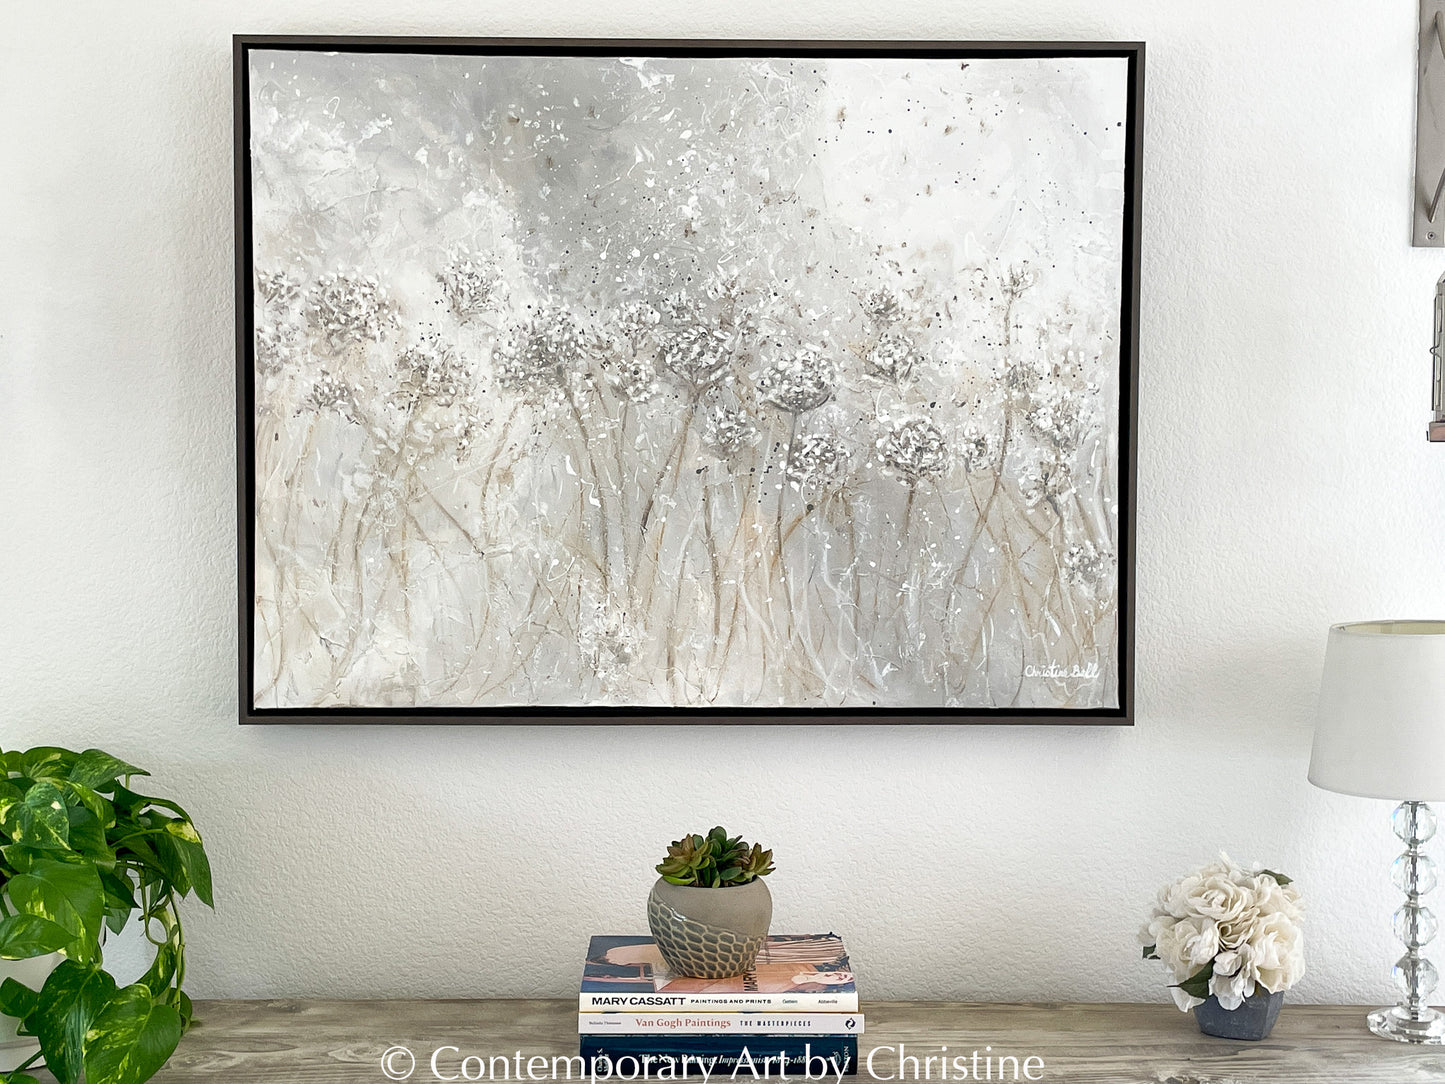 COMMISSIONED PAINTING, Original Fine Art Painting by Christine Bell, *Select Request a Quote